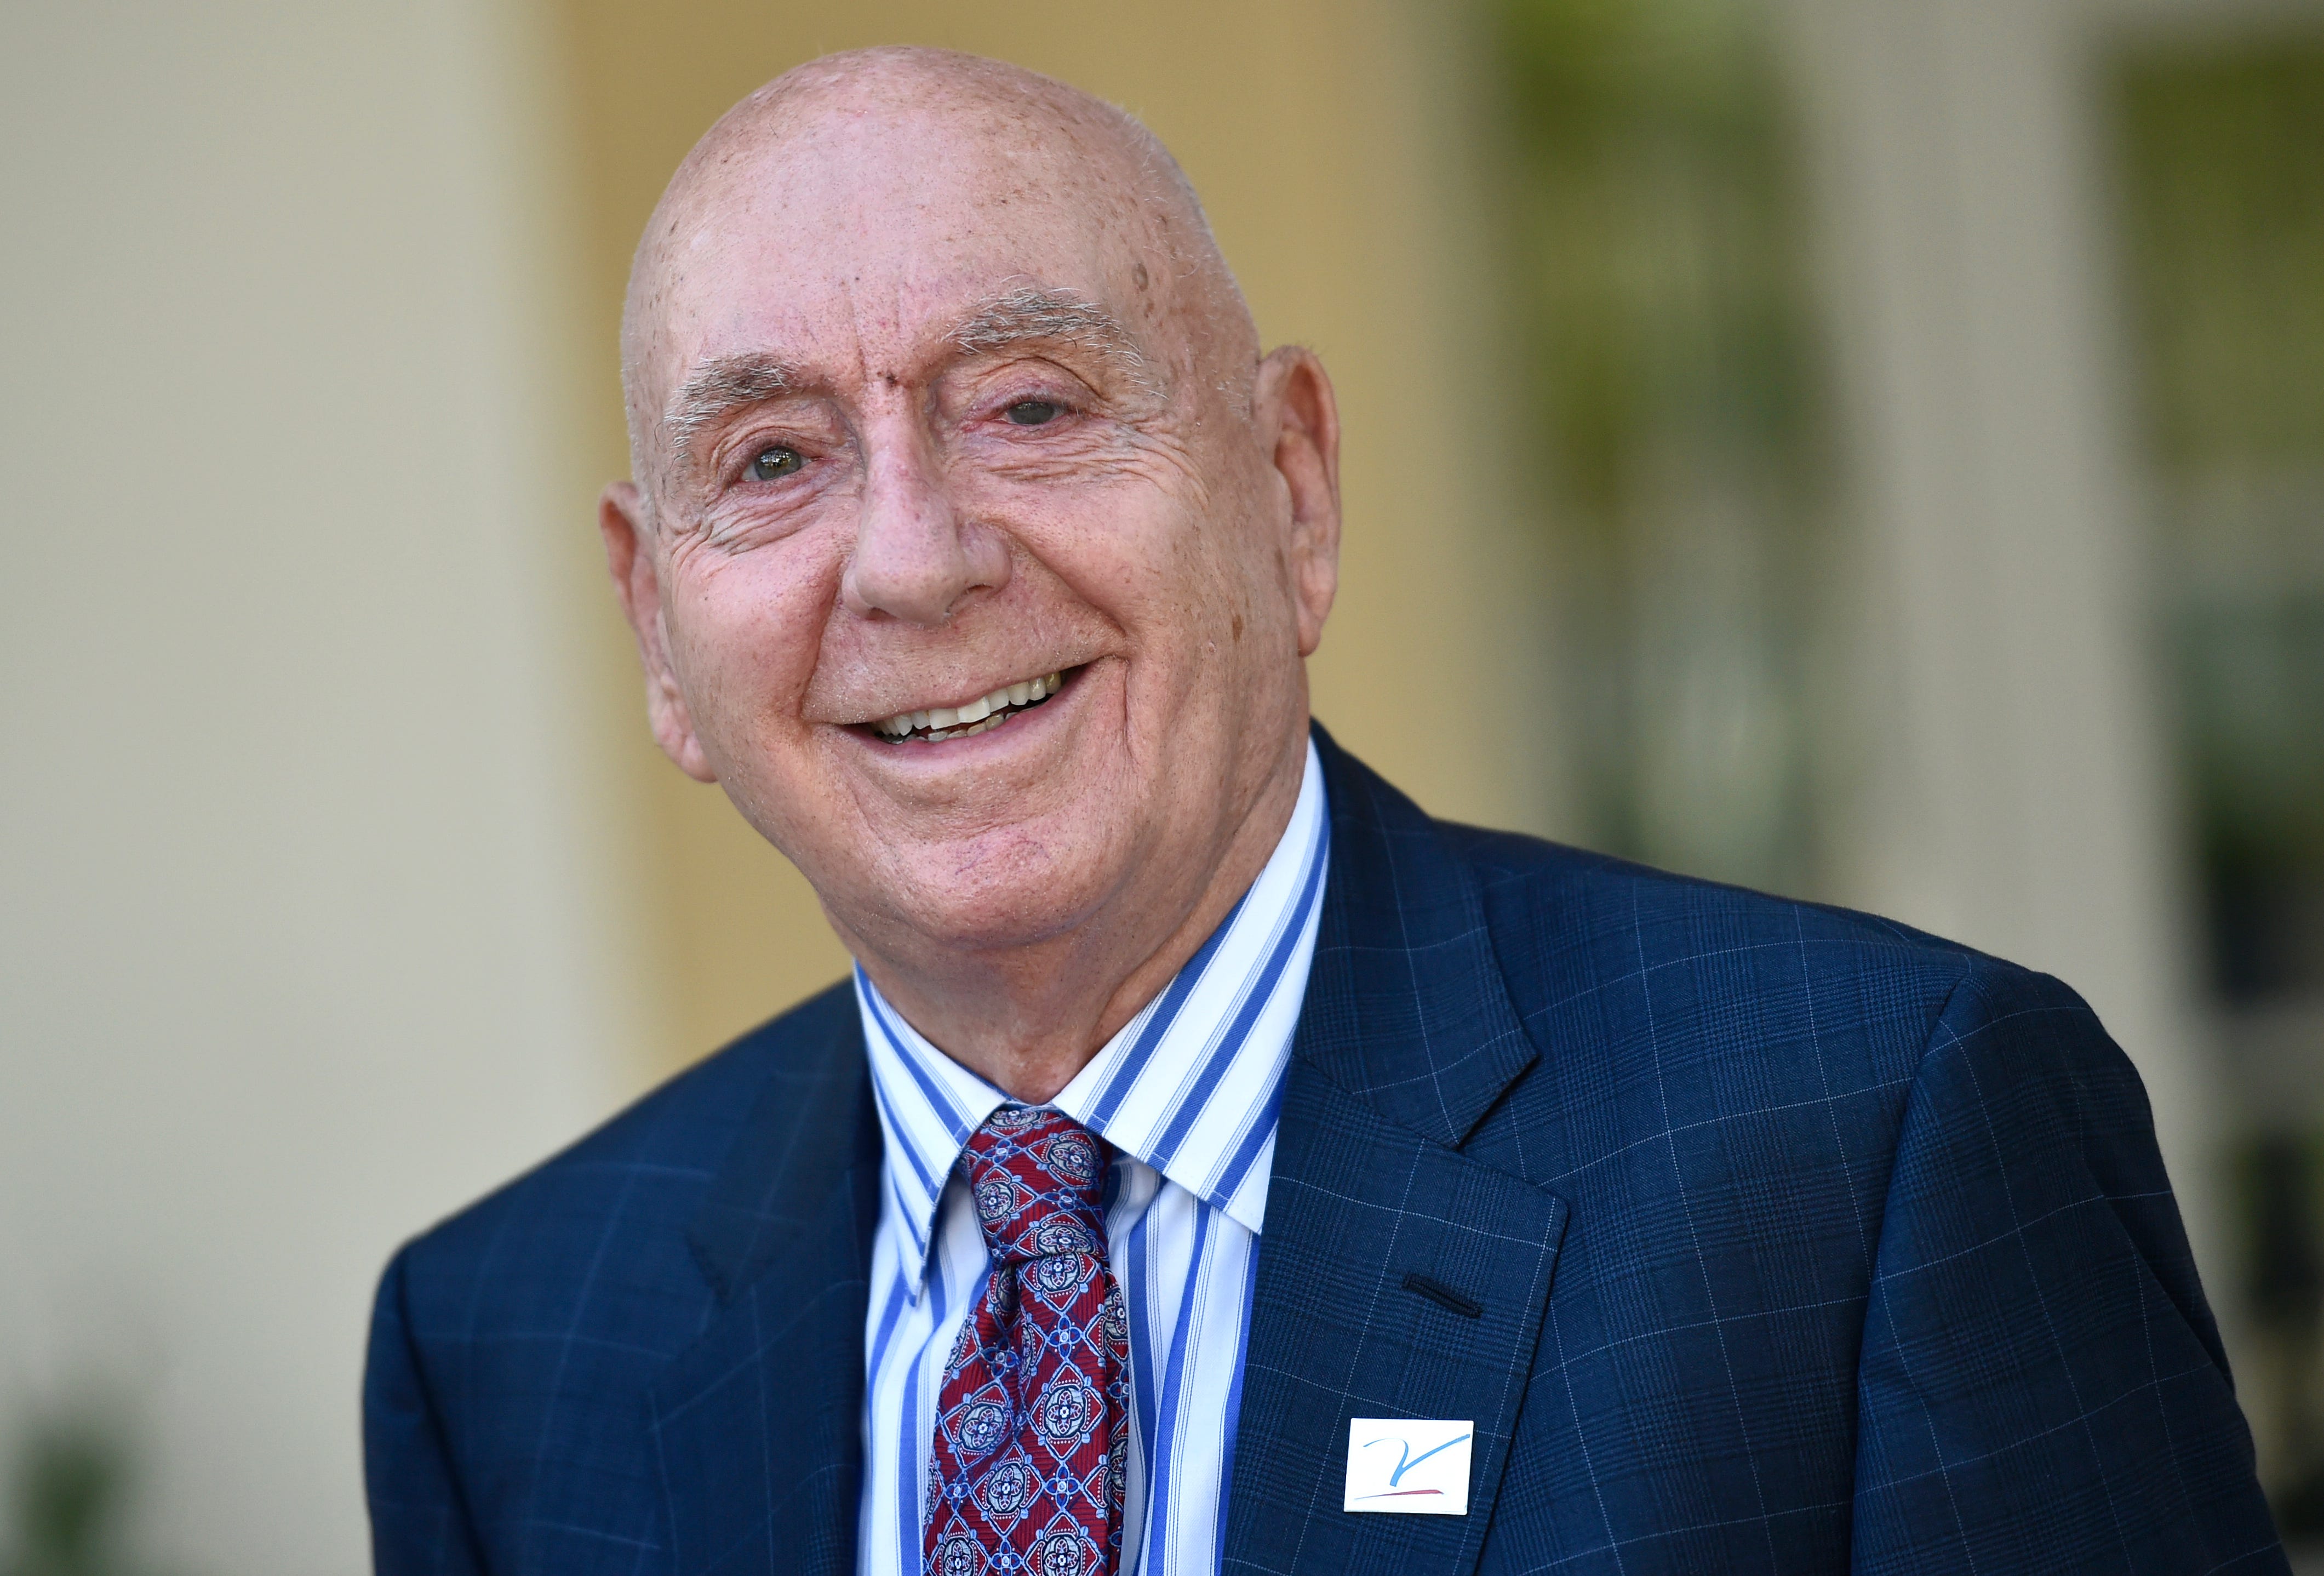 More than $7 million expected to be raised at 17th Annual Dick Vitale Gala